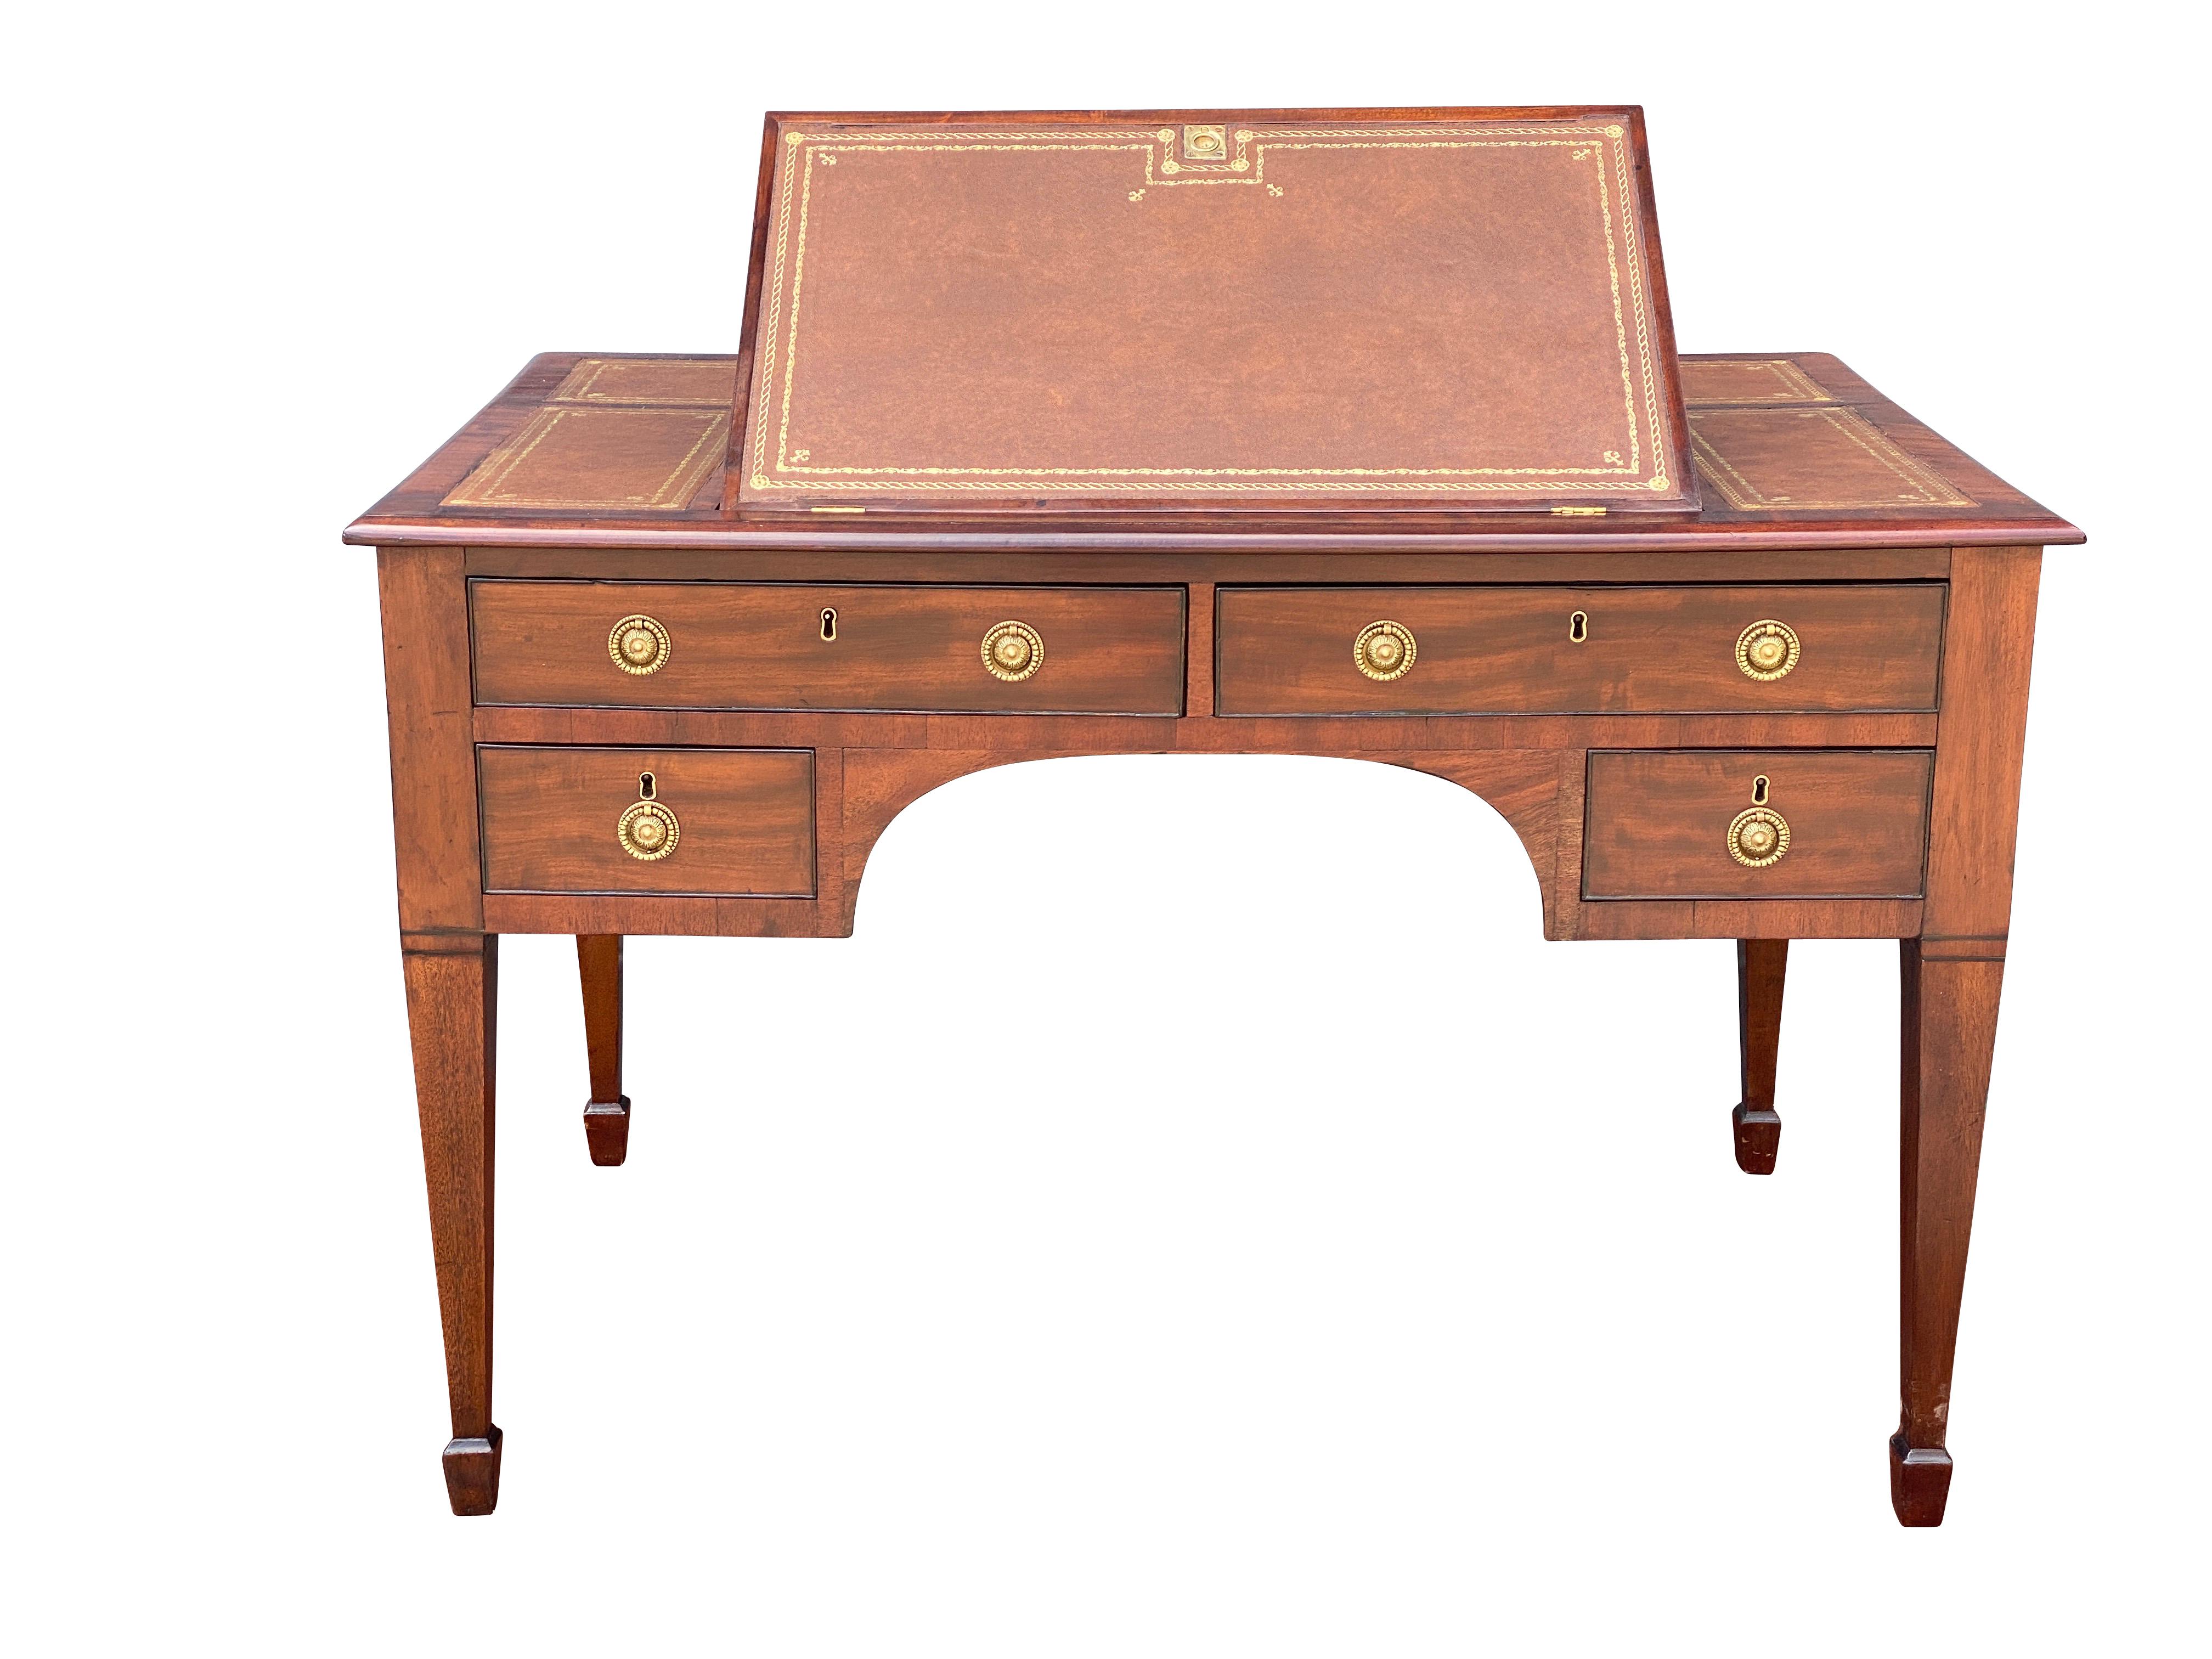 Rectangular top with all new olive tooled leather and central hinged rest, over a pair of drawers over two small drawers, raised on square tapered legs with spade feet. The back is plain but finished.